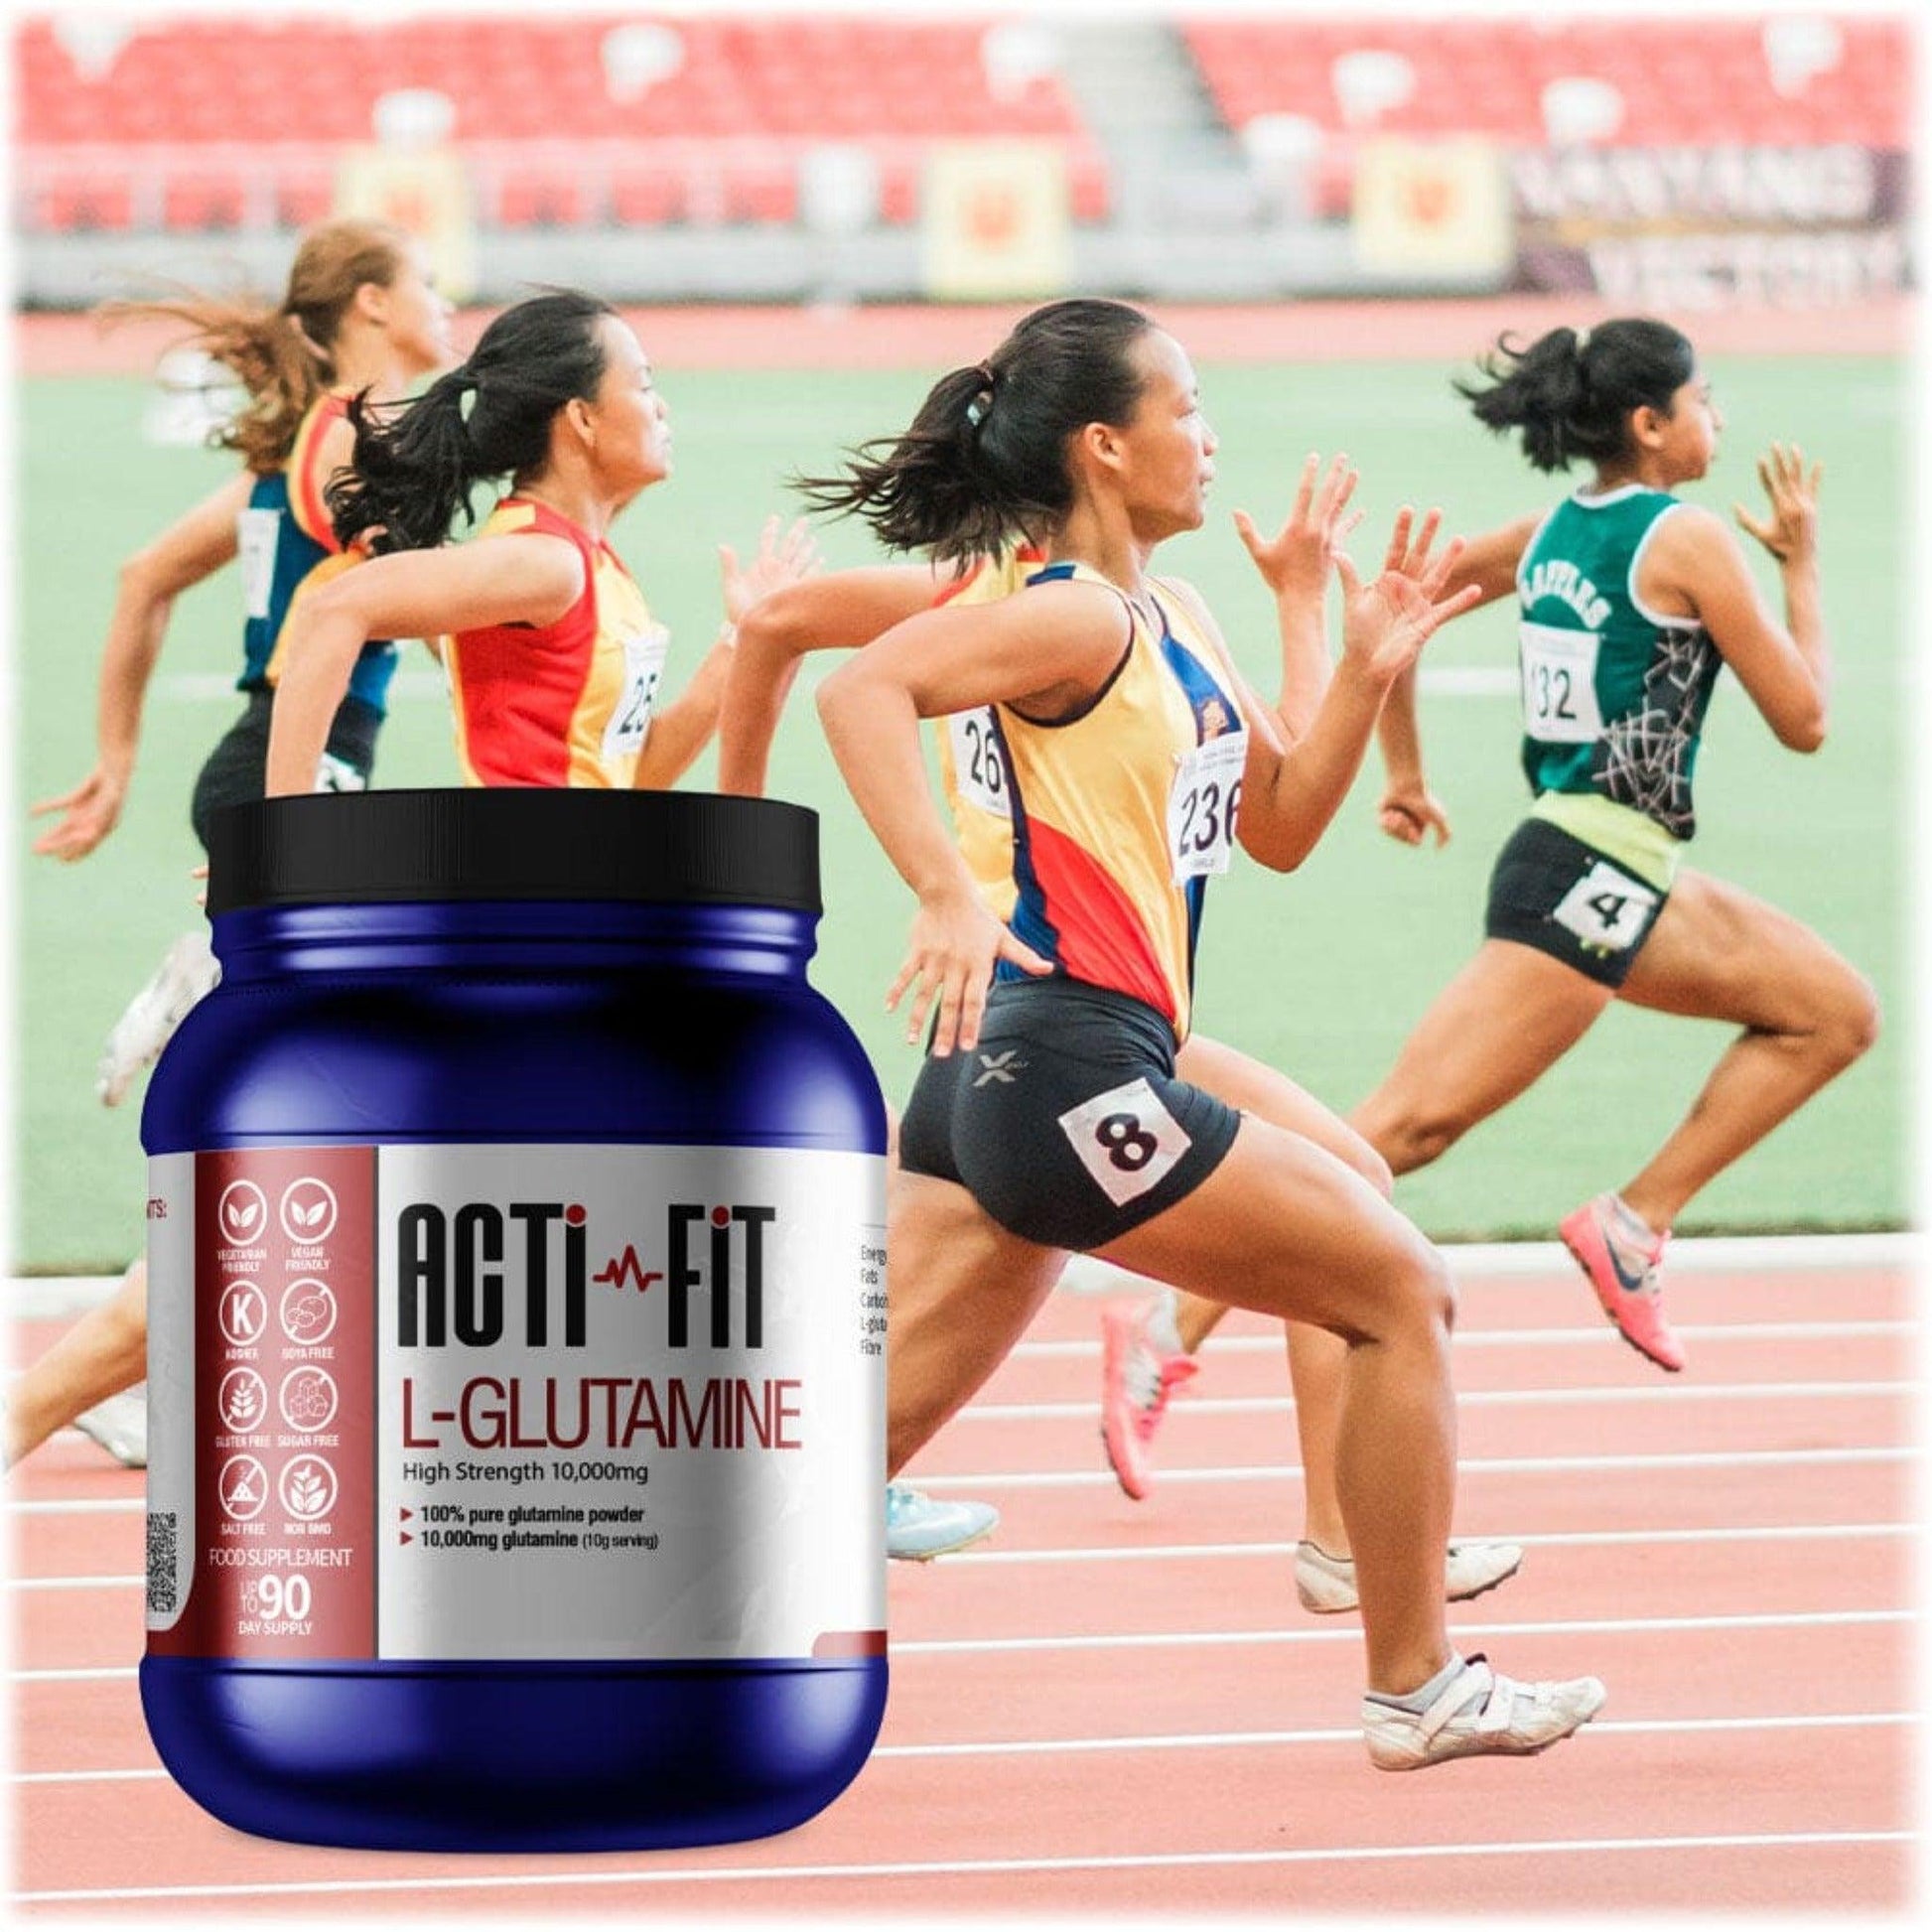 Women competing in a running race on an athletic track with a tub of Acti-Fit L-Glutamine 10,000mg in the foreground